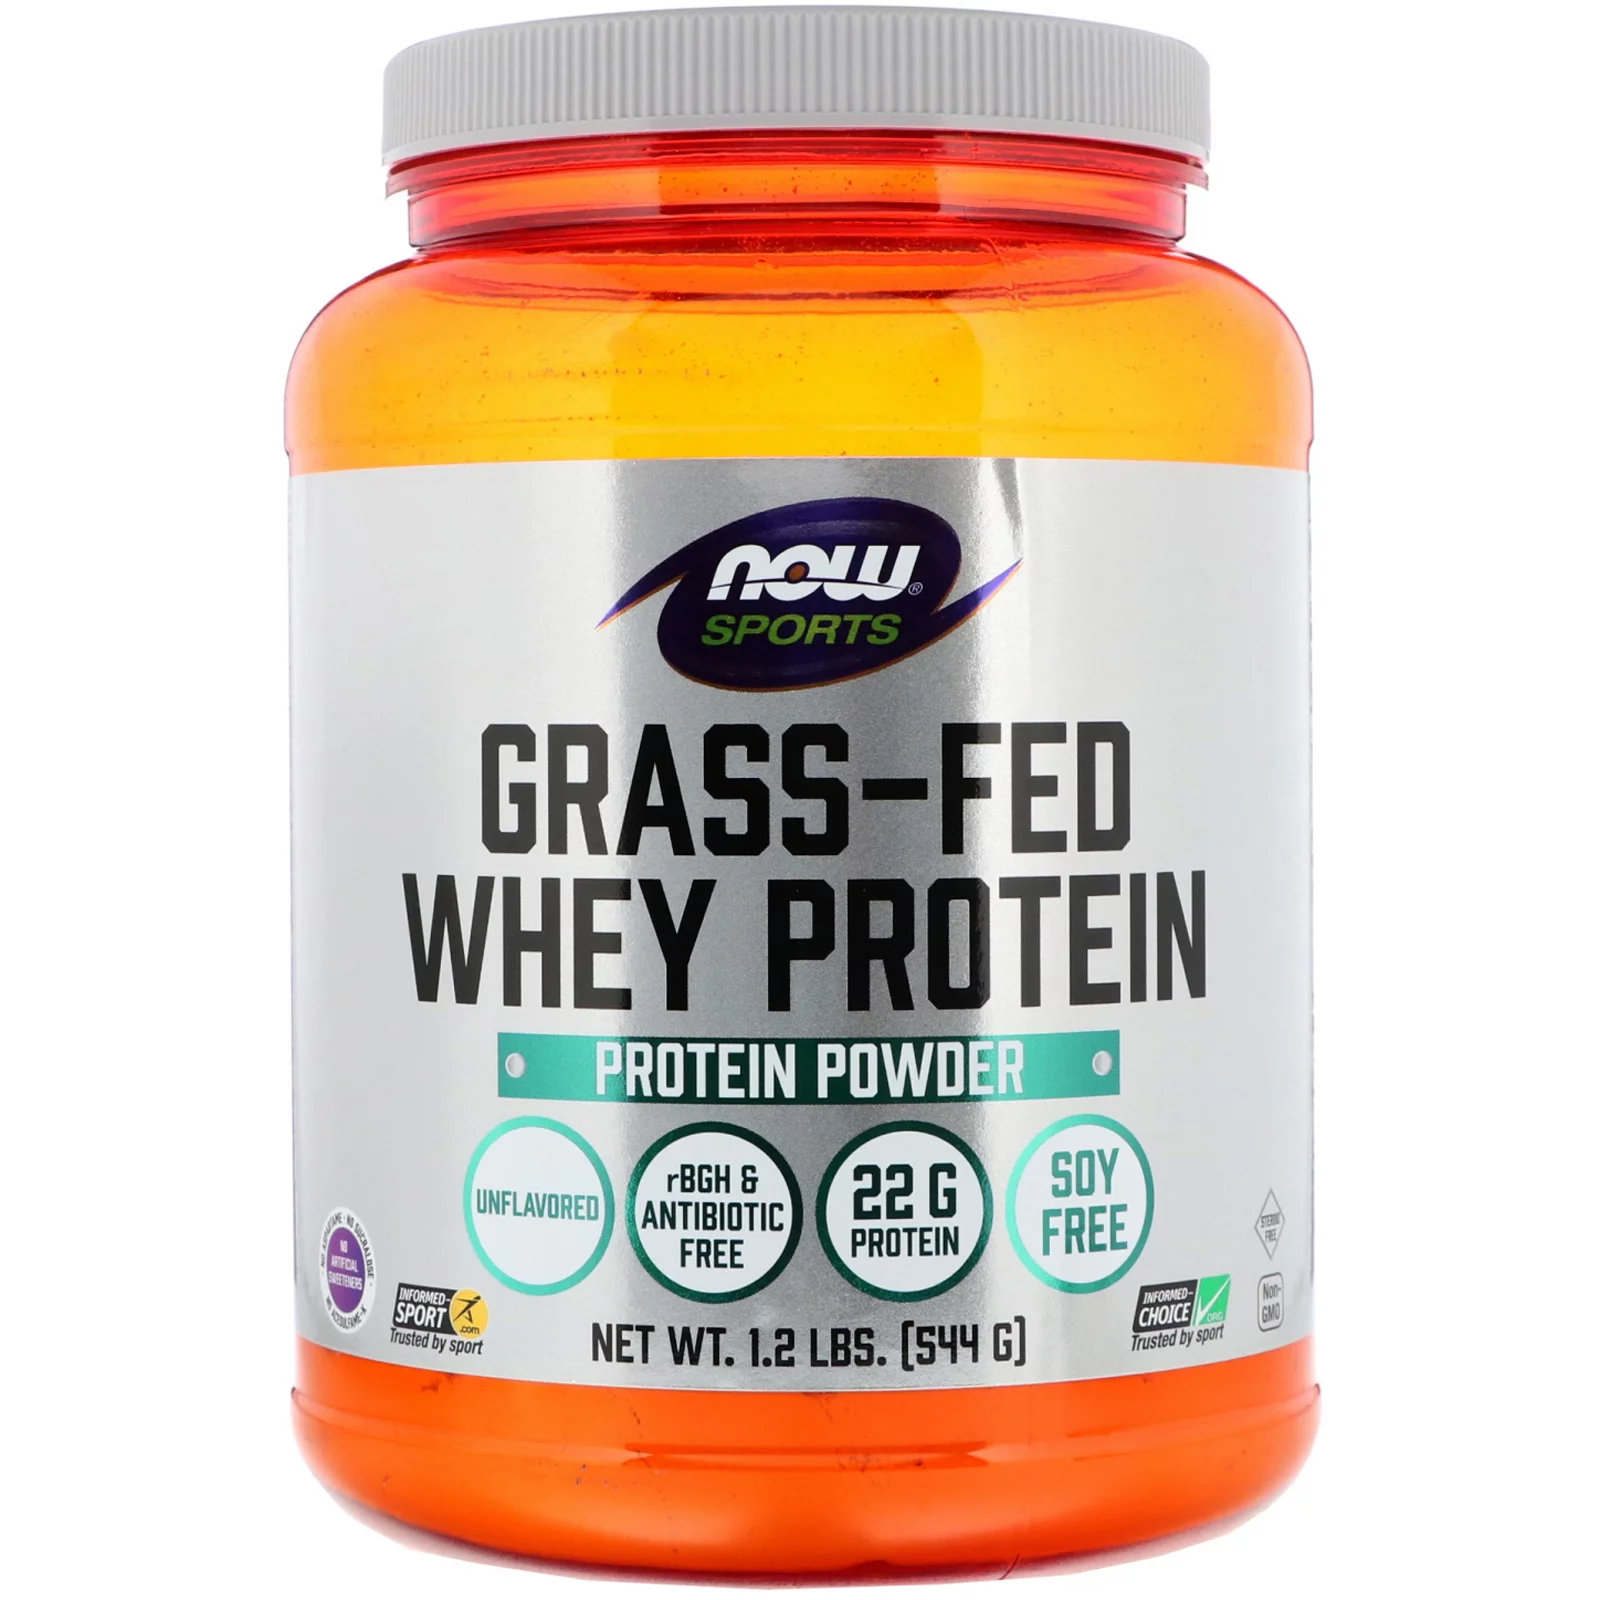 What Does Grass-Fed Whey Protein Mean